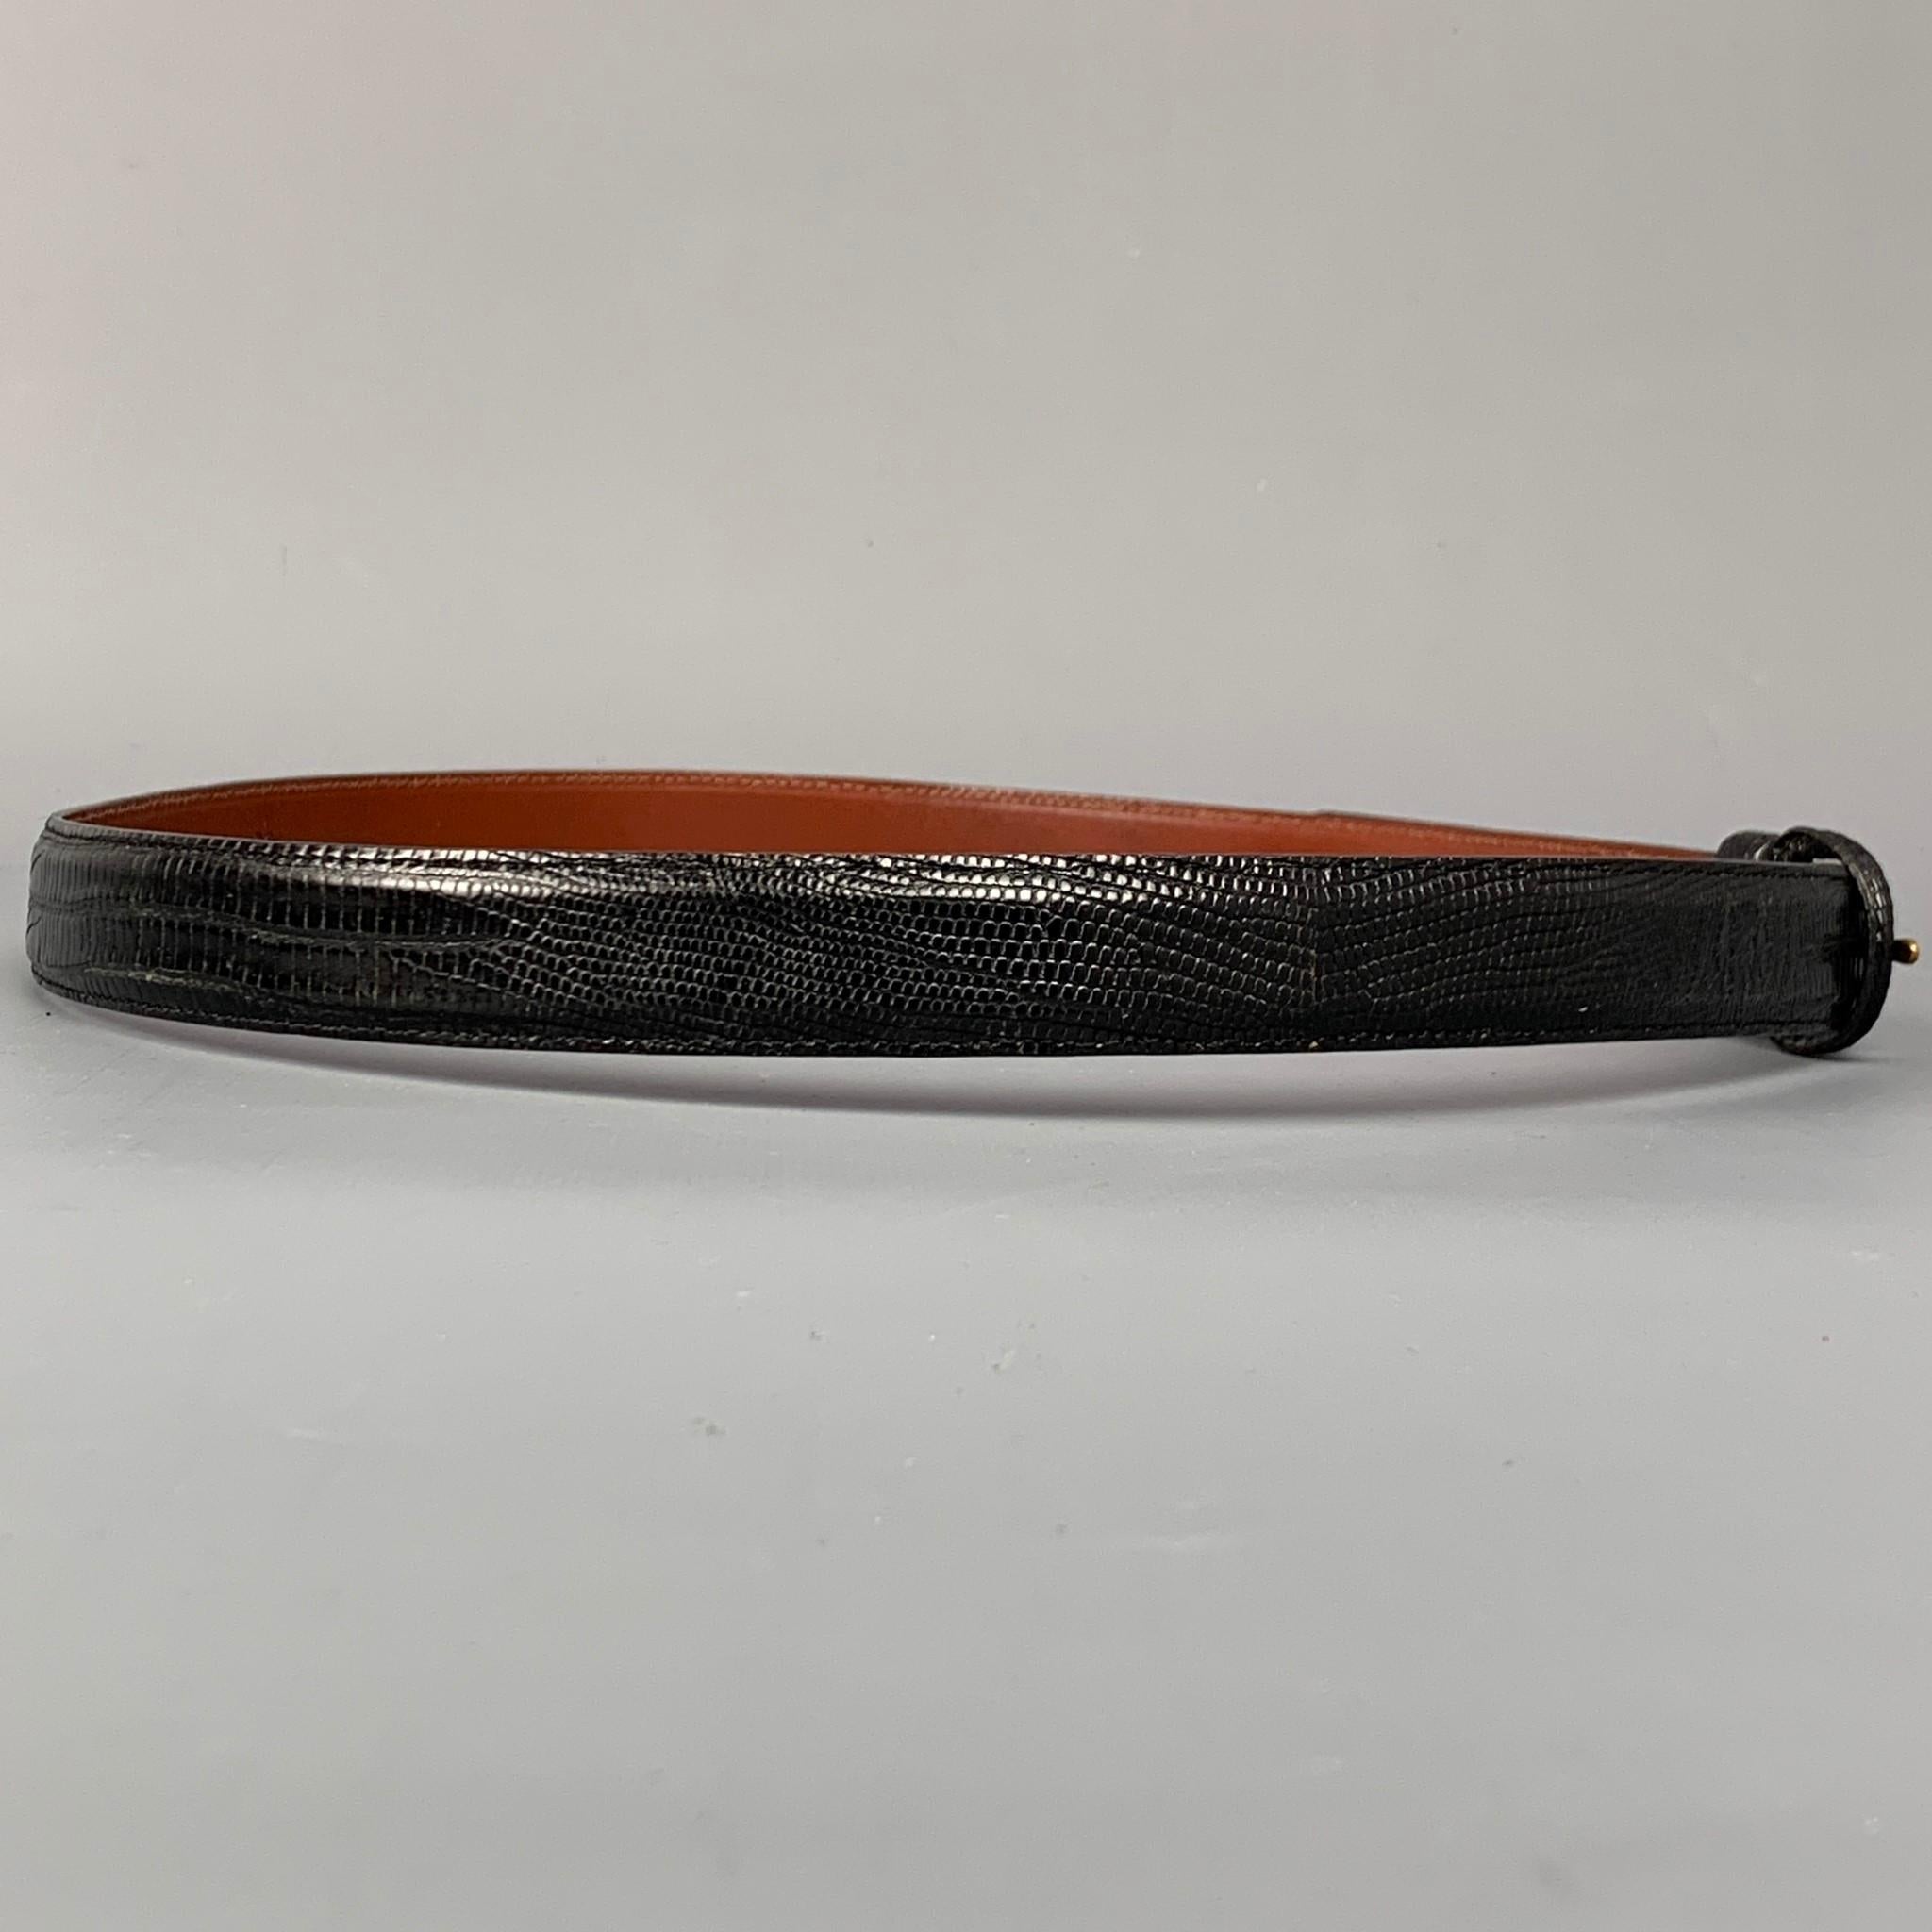 POLO by RALPH LAUREN belt comes in a black lizard leather featuring a covered buckle closure. Made in USA.

Very Good Pre-Owned Condition.
Marked: 36

Length: 41 in.
Width: 0.75 in.
Fits: 34 in. - 38 in.
 